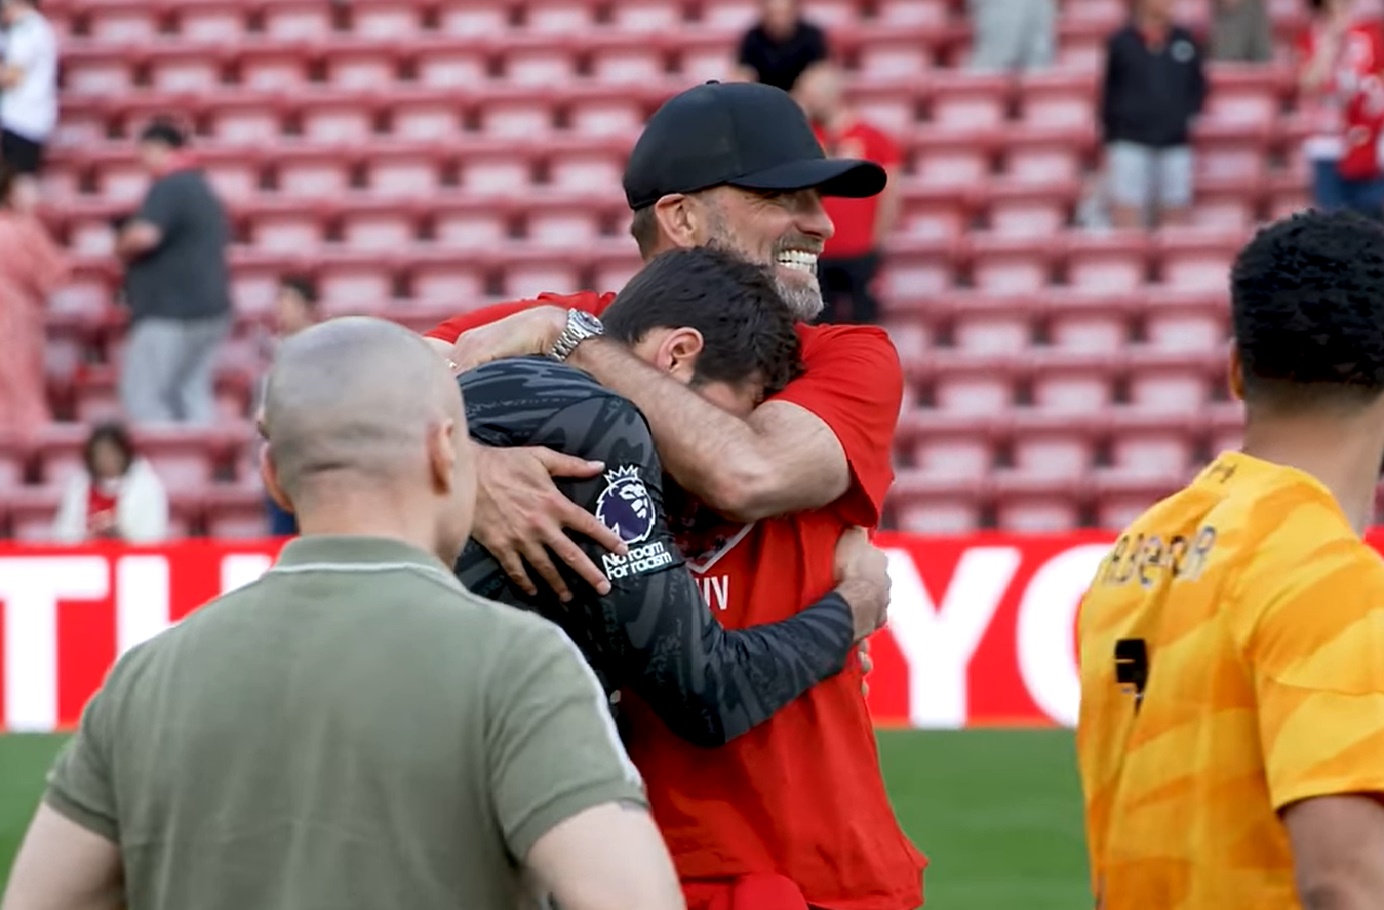 (Video) New footage shows heartbreaking interaction between Klopp and Alisson on Anfield pitch